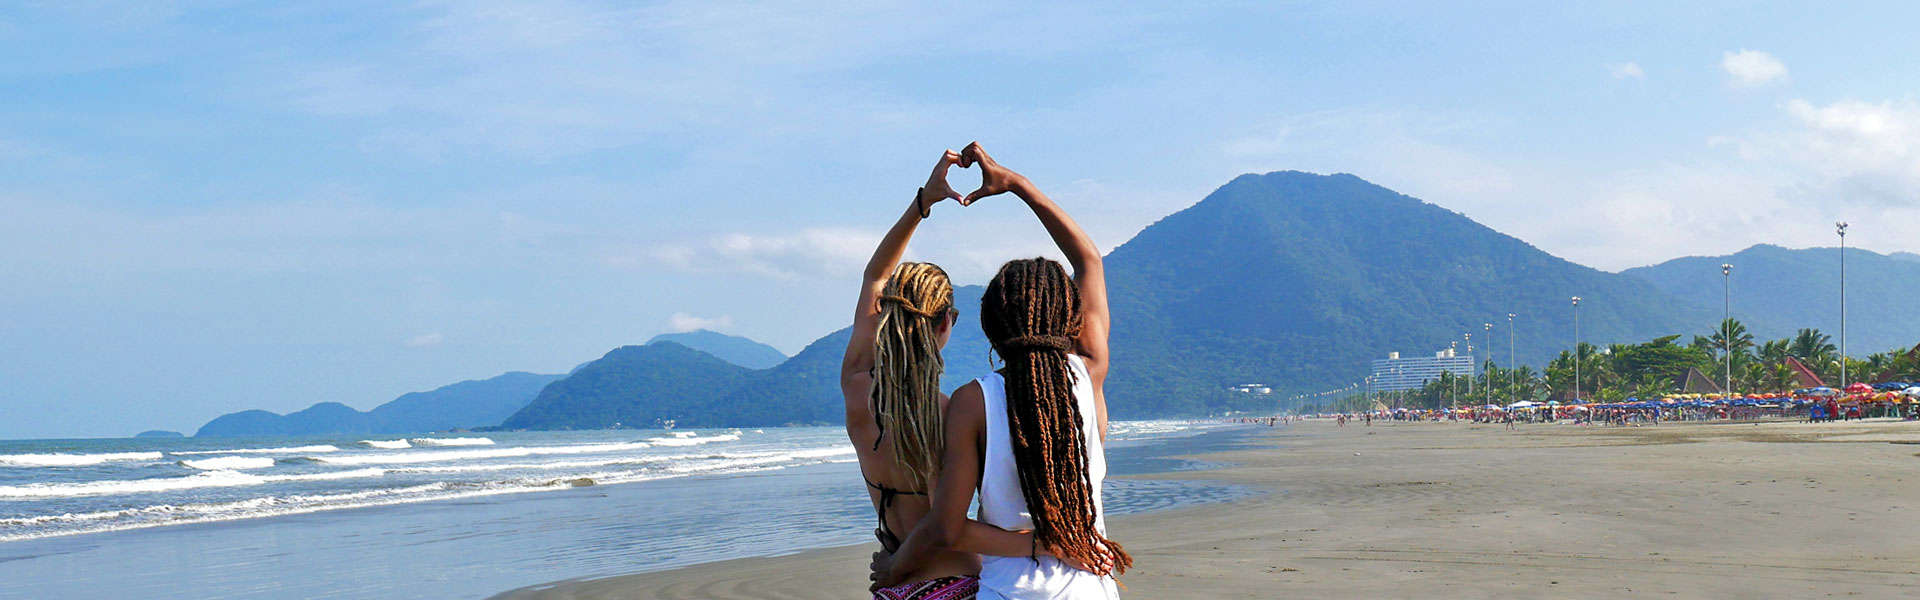 Dreadlock couple forming heart with hands at beach in Peruíbe, Brazil